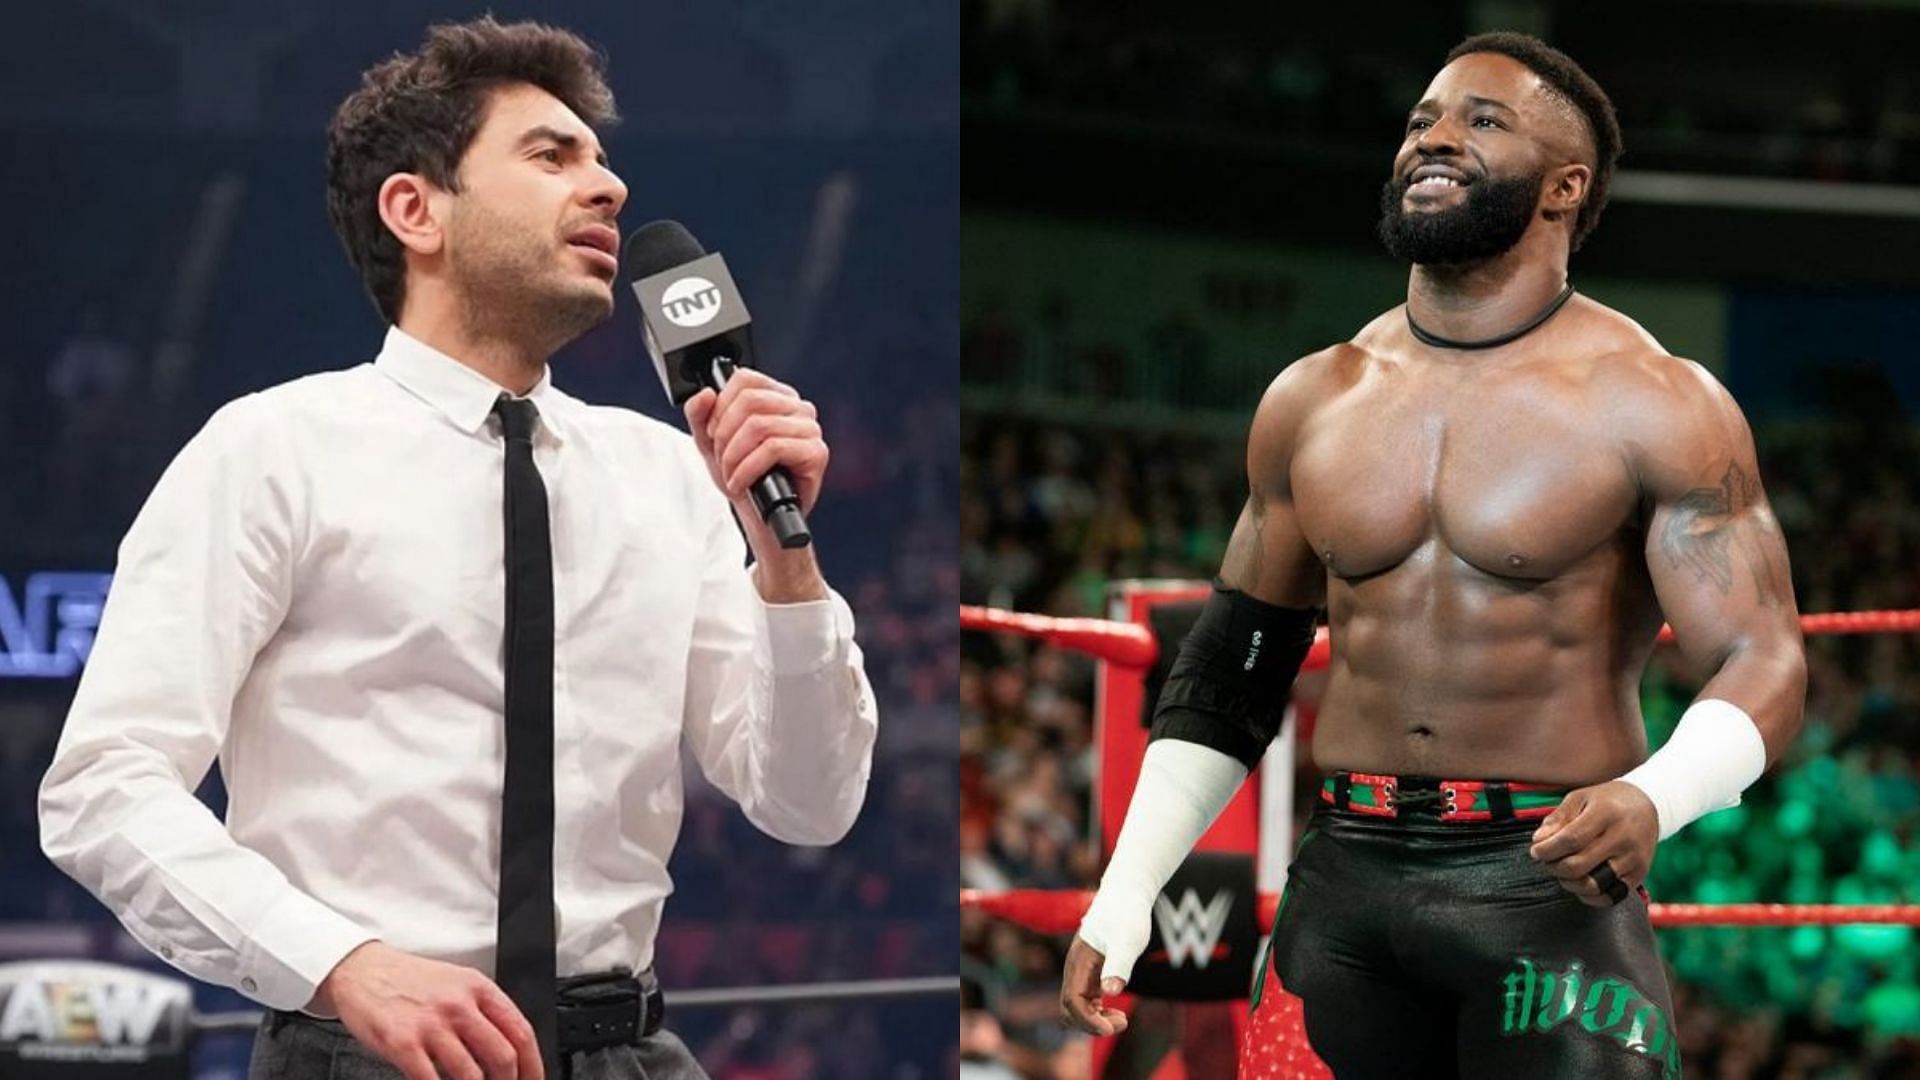 Tony Khan (left) can make a potential megastar out of Cedric Alexander (right)